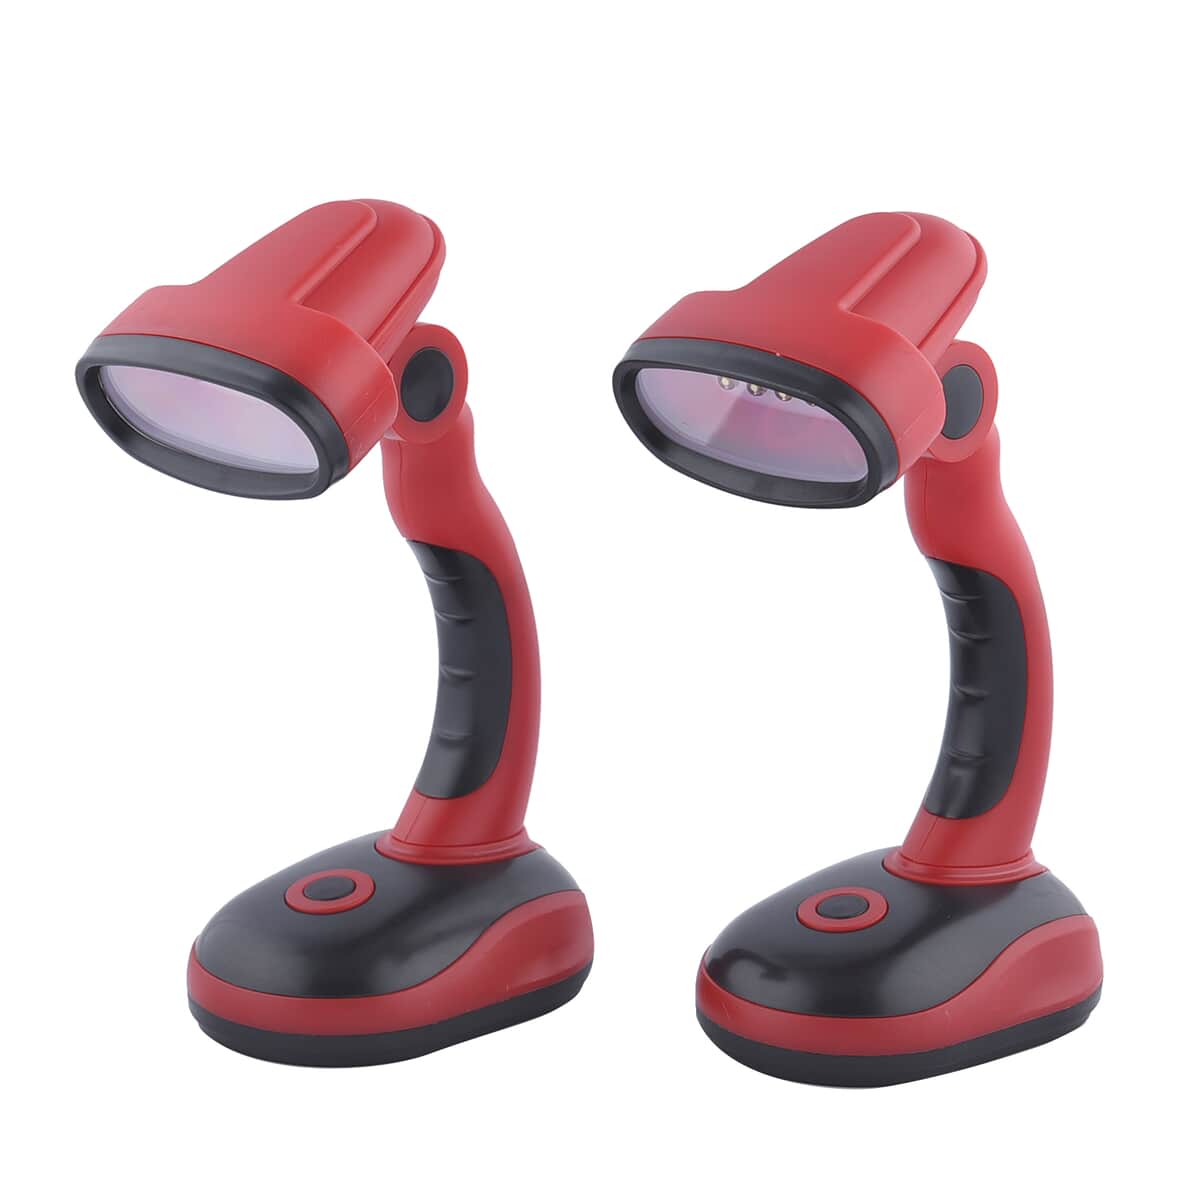 Homesmart Set of 2 Flexible Desk LED Light Lamp - Red (3xAA Batteries Not Included) image number 0